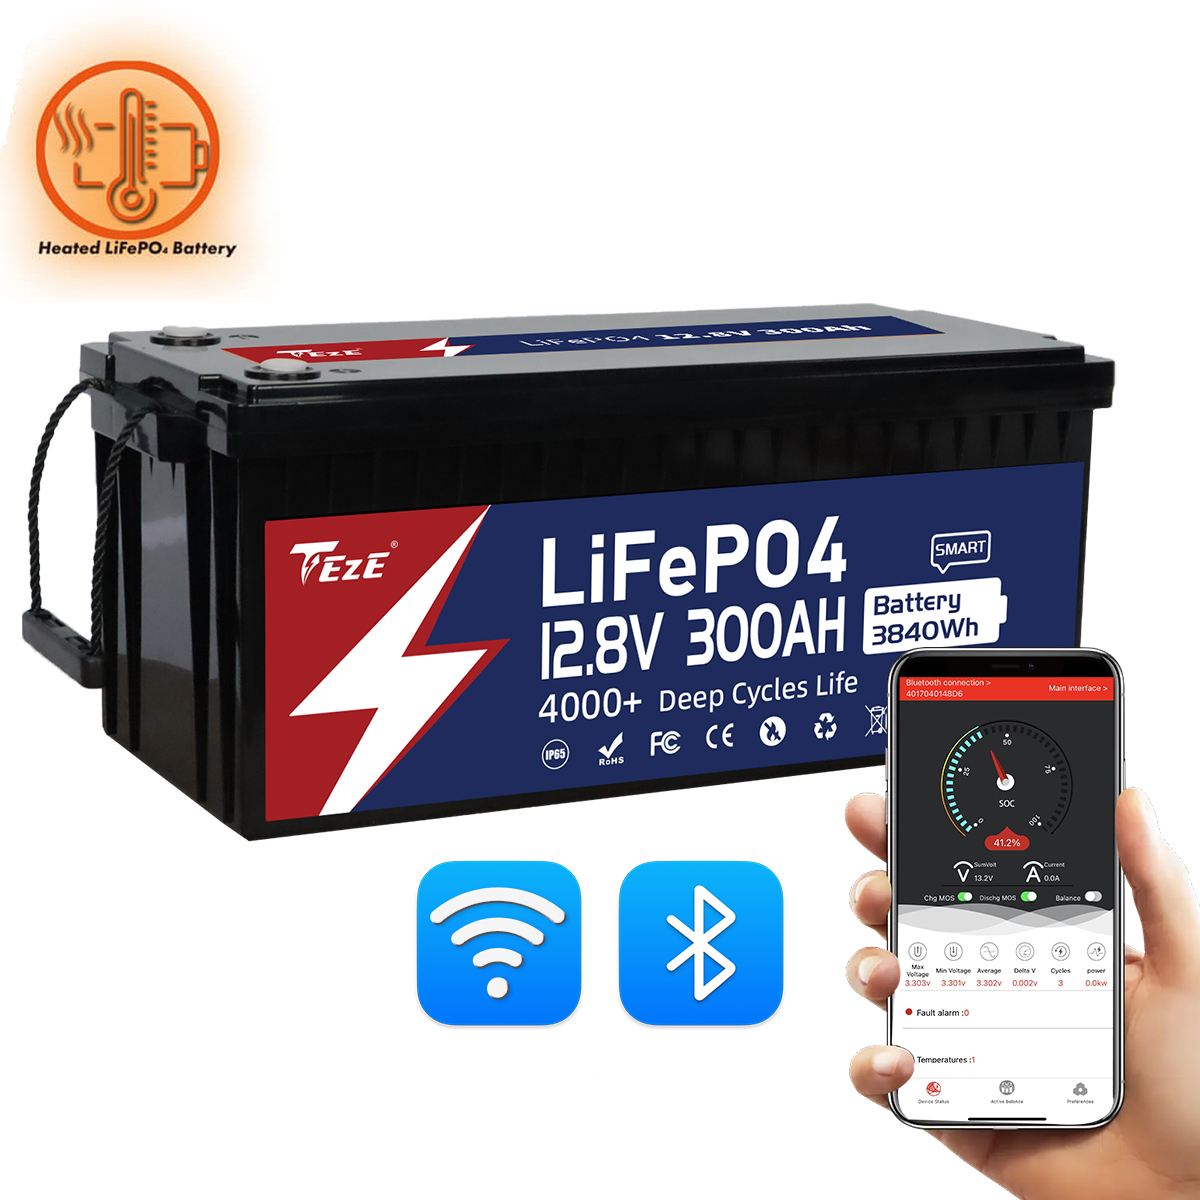 TezePower 12V 300Ah LiFePO4 Battery with RS485/RS232/CAN Communication Ports, WiFi and Bluetooth, Self-heating and Active Balancer, Built-in 200A Daly BMS(WiFi Built-in Version)-TezePower